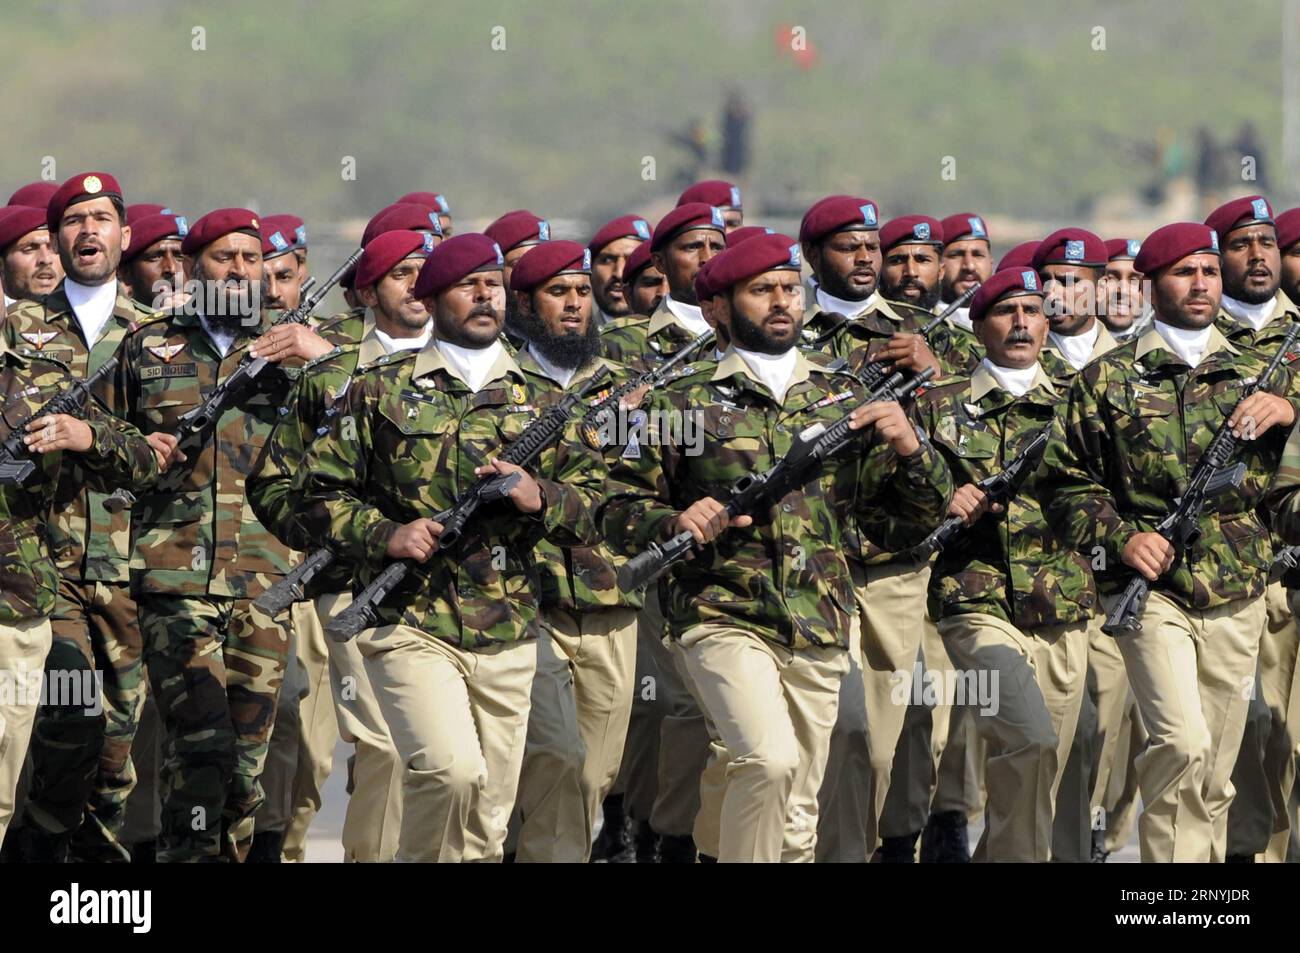 (180323) -- ISLAMABAD, March 23, 2018 -- Pakistani troops from the Special Services Group (SSG) march during the military parade to mark Pakistan s National Day in Islamabad, capital of Pakistan on March 23, 2018. )(rh) PAKISTAN-ISLAMABAD-NATIONAL DAY-MILITARY PARADE AhmadxKamal PUBLICATIONxNOTxINxCHN Stock Photo